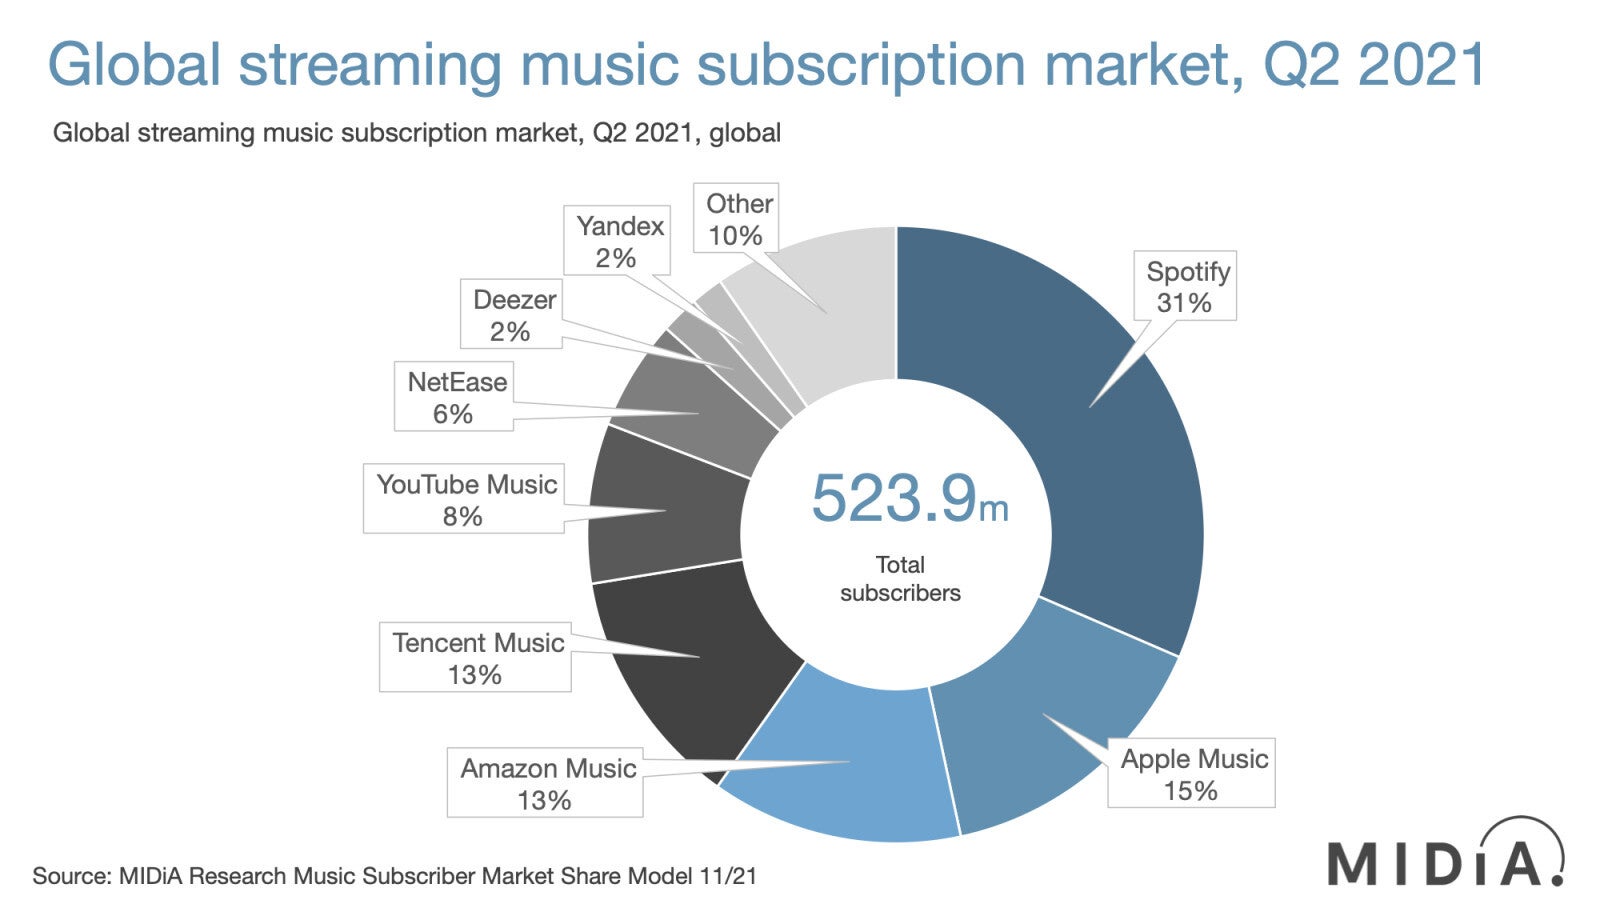 These are the most used music streaming services in the world